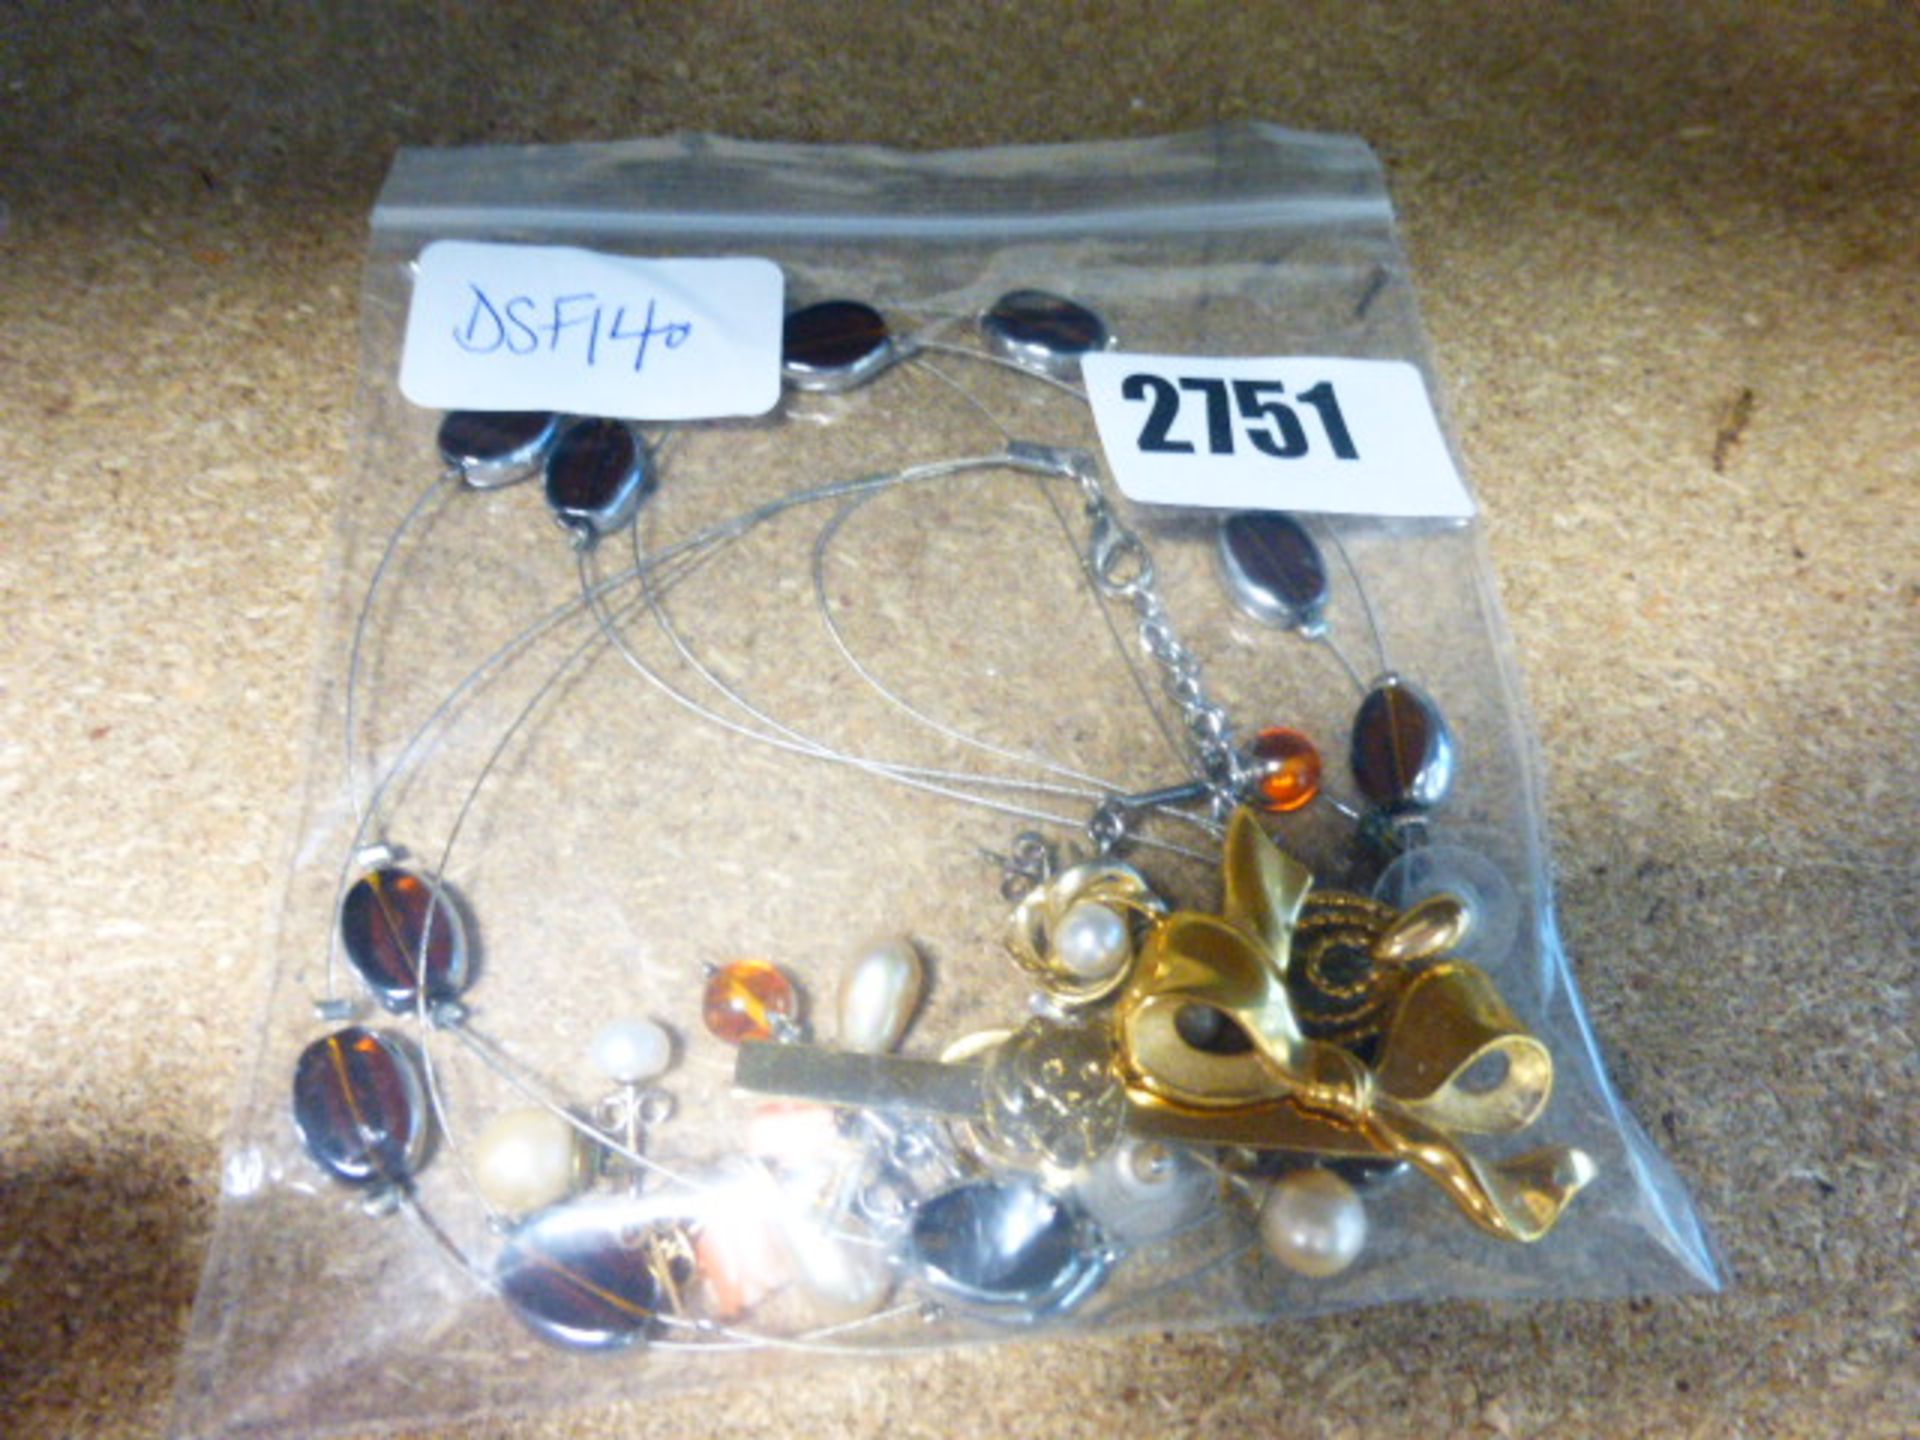 Selection of costume jewellery items in clear bag